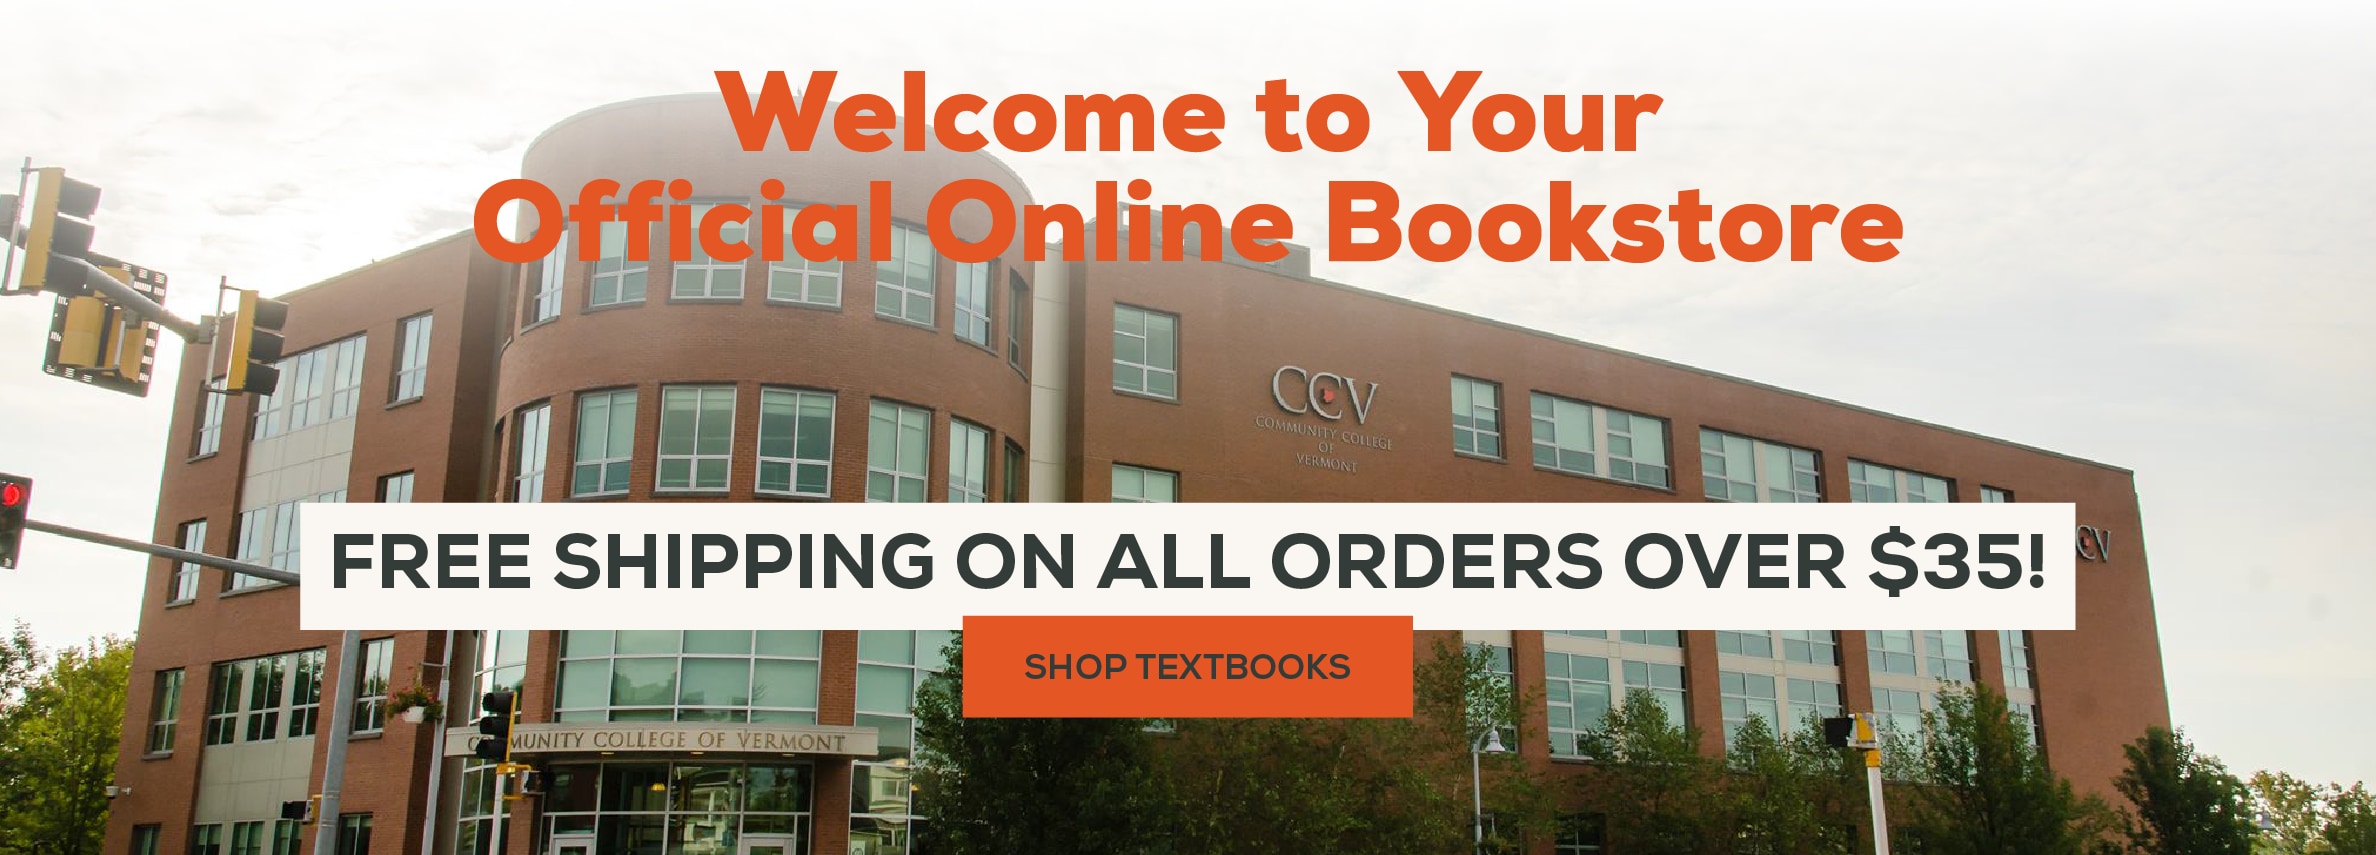 Welcome to your official Online Bookstore. Free shipping on all orders over $35!